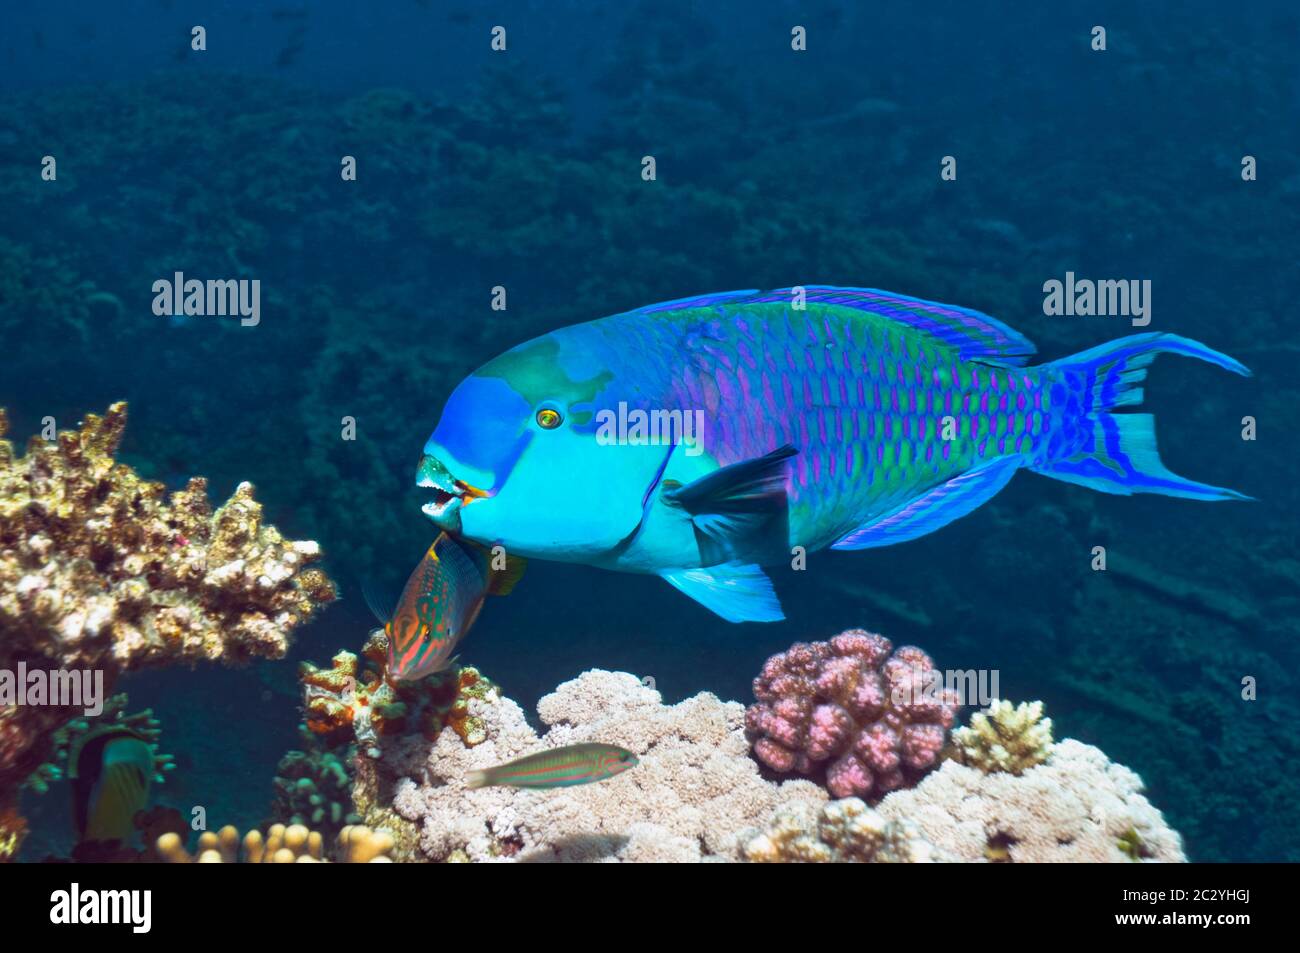 Steep headed parrotfish (Scarus gibbus), feeding male followed by a Chequerboard wrasse (Halichoeres hortulanus).  Egypt, Red Sea. Stock Photo